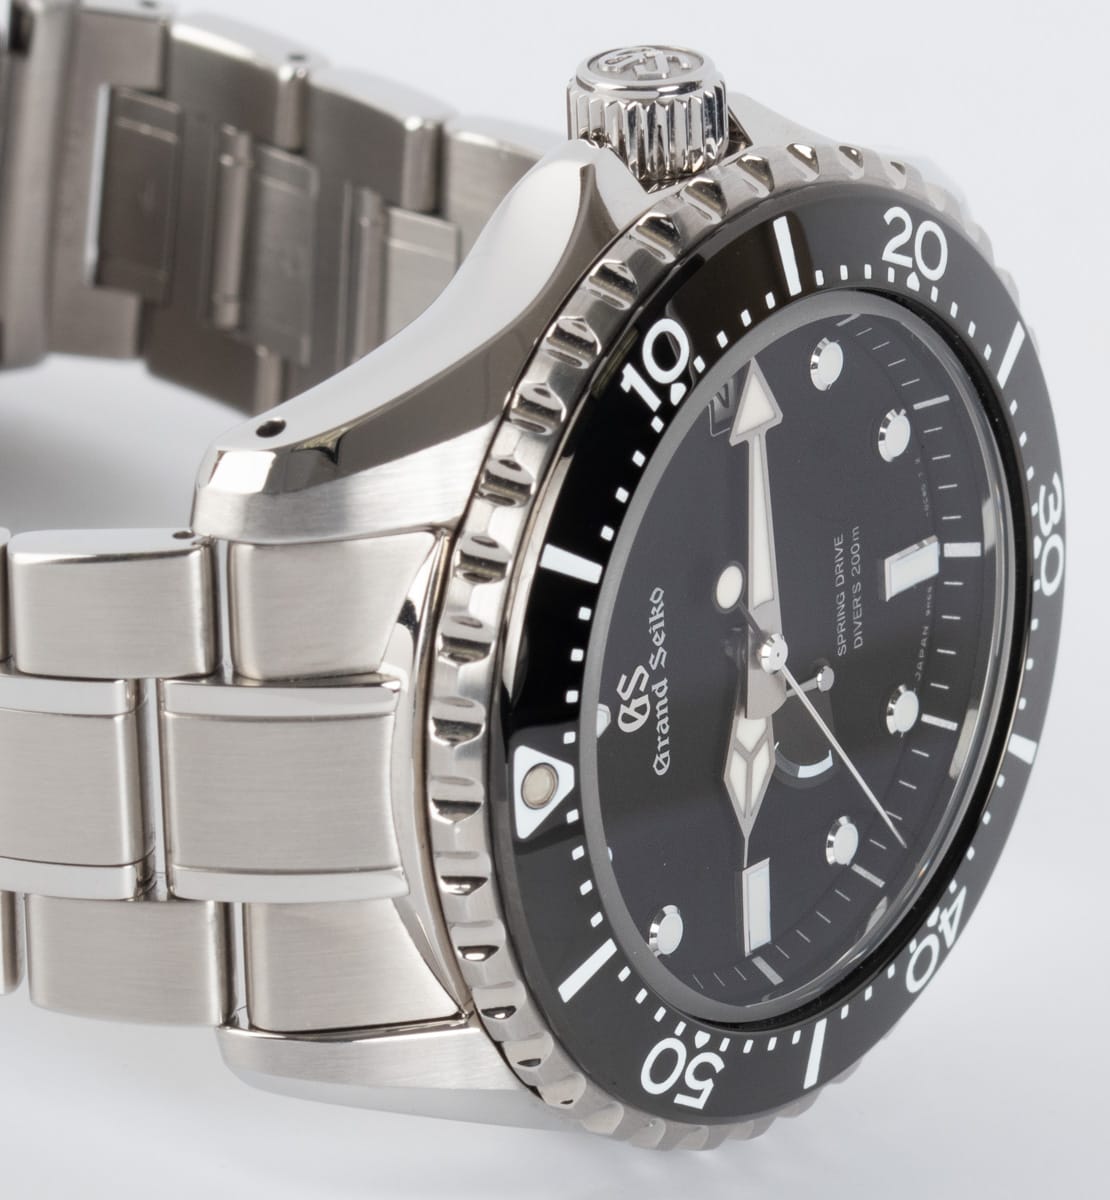 Dial Shot of Spring Drive Diver